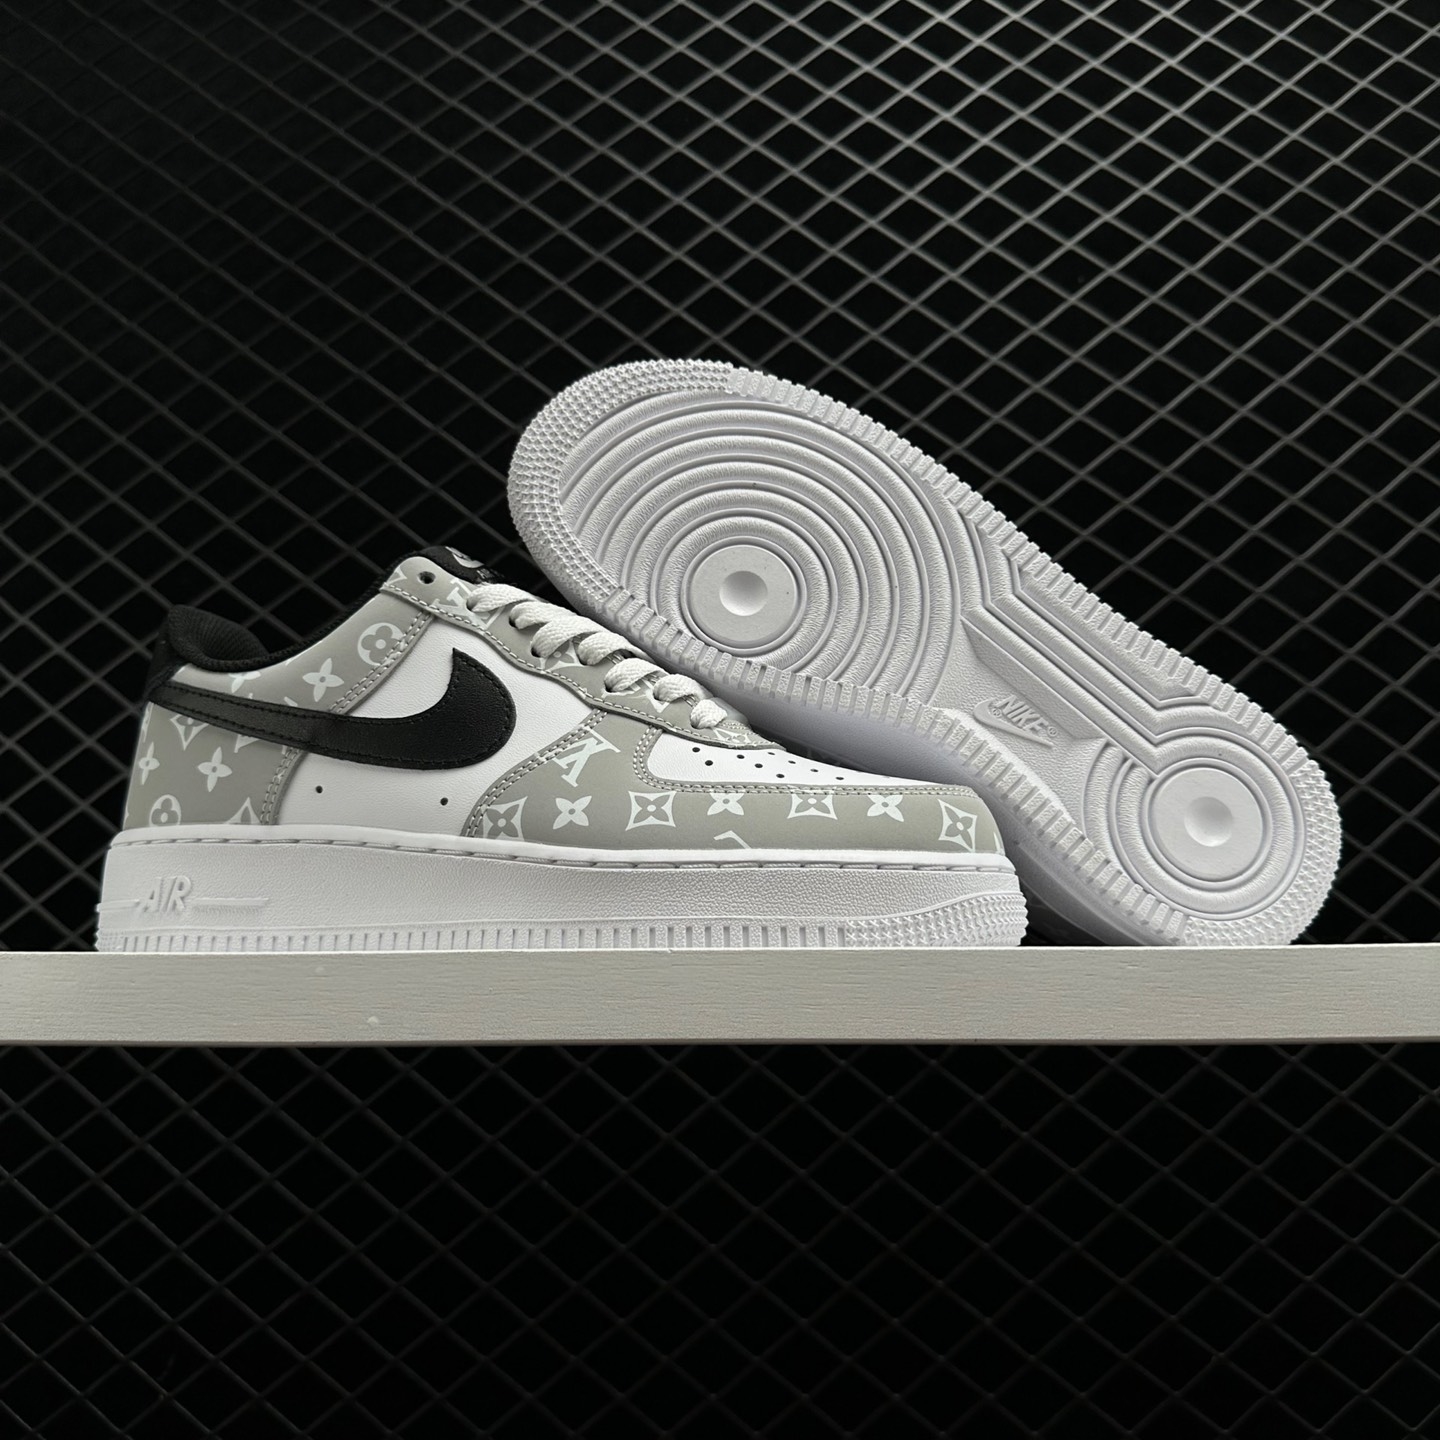 Shop Authentic Louis Vuitton Nike Air Force 1 Sneakers | Limited Edition